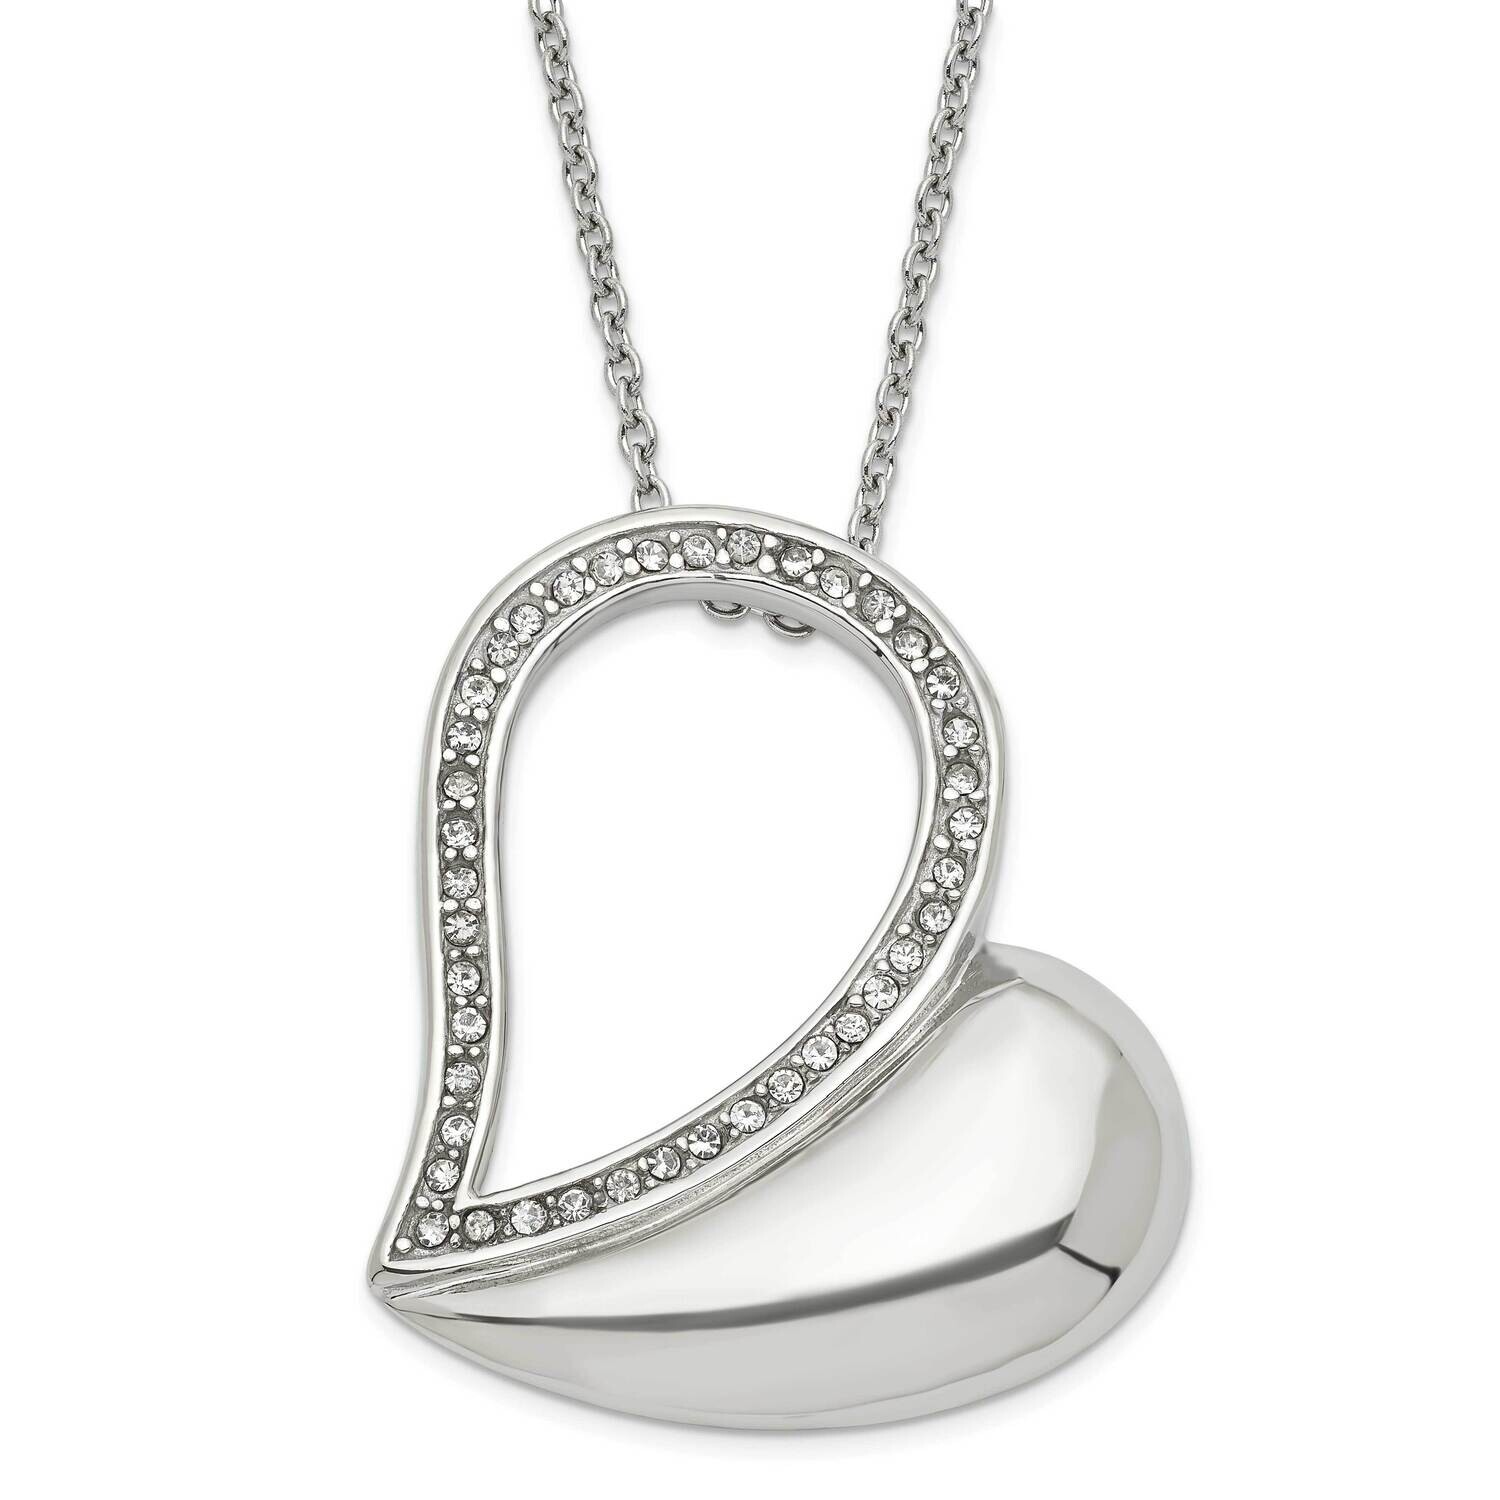 Polished Crystal Heart Necklace Stainless Steel SRN1304-17.5